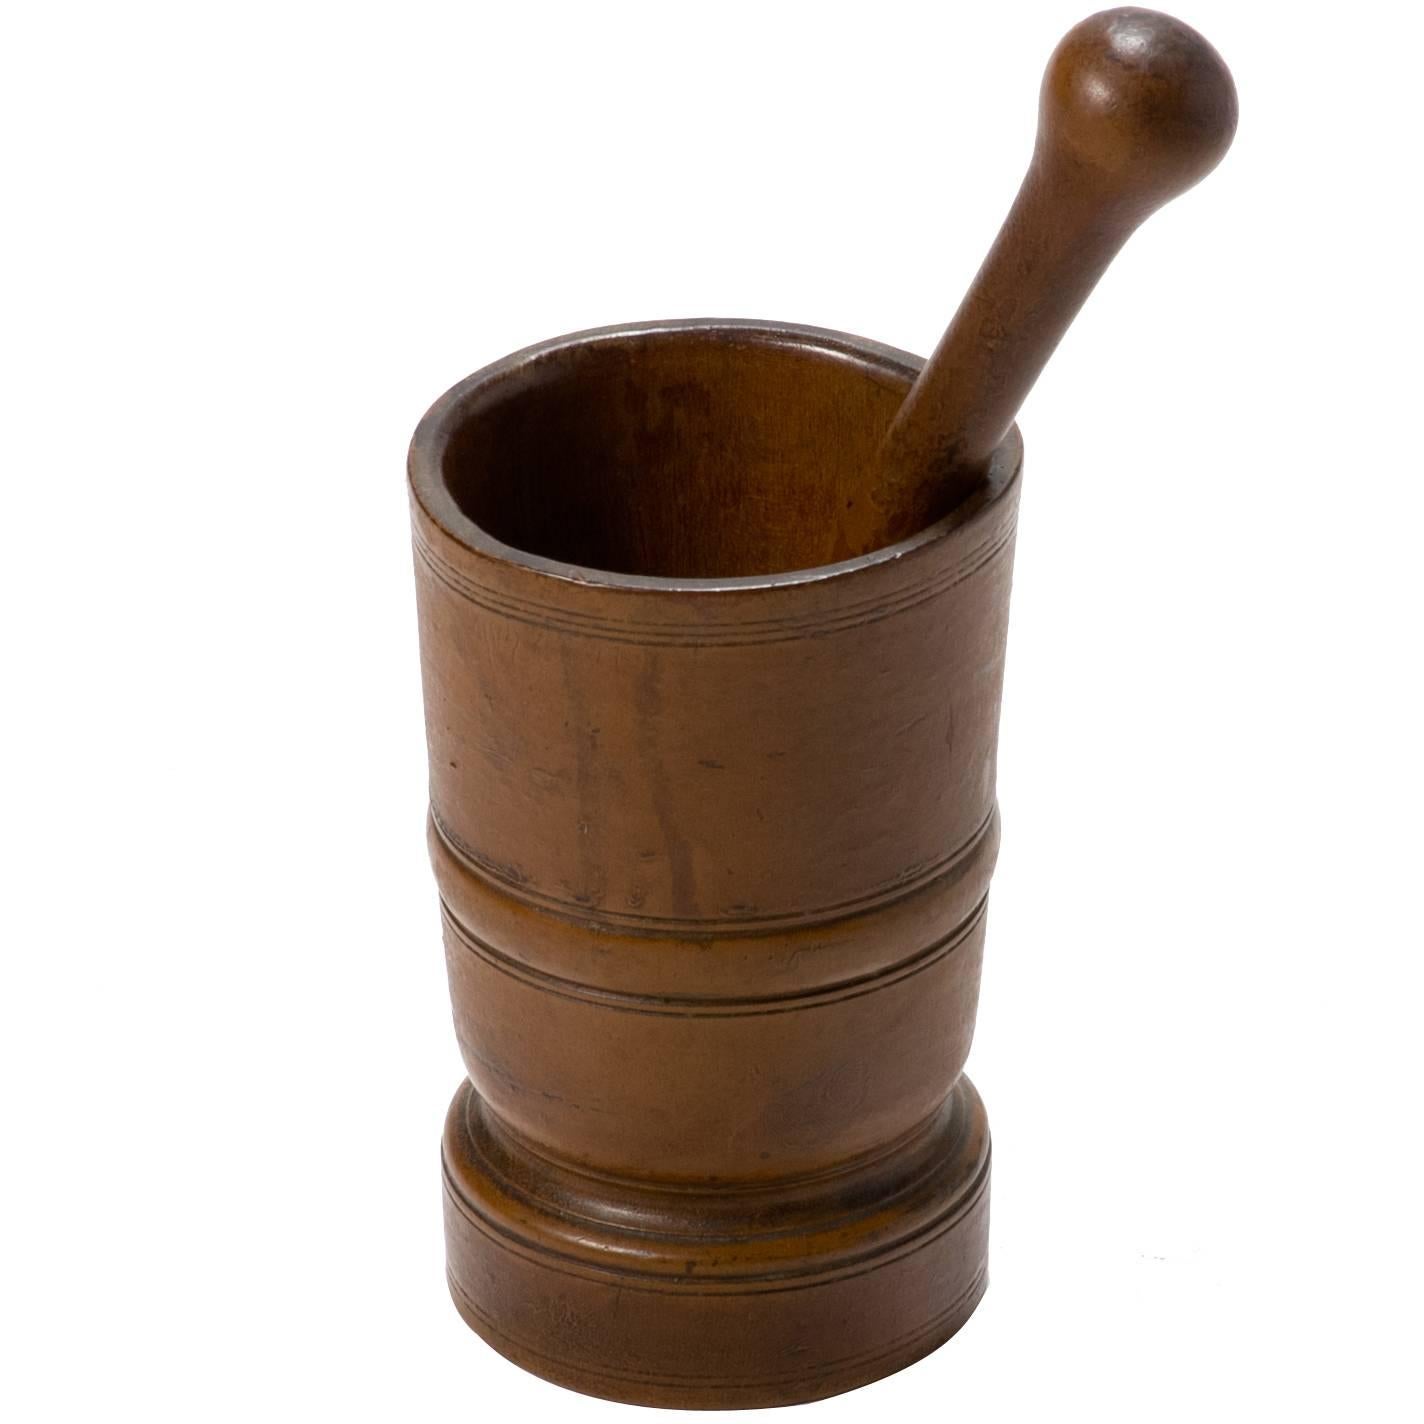 A Late 19th Century Wooden Mortar and Pestle